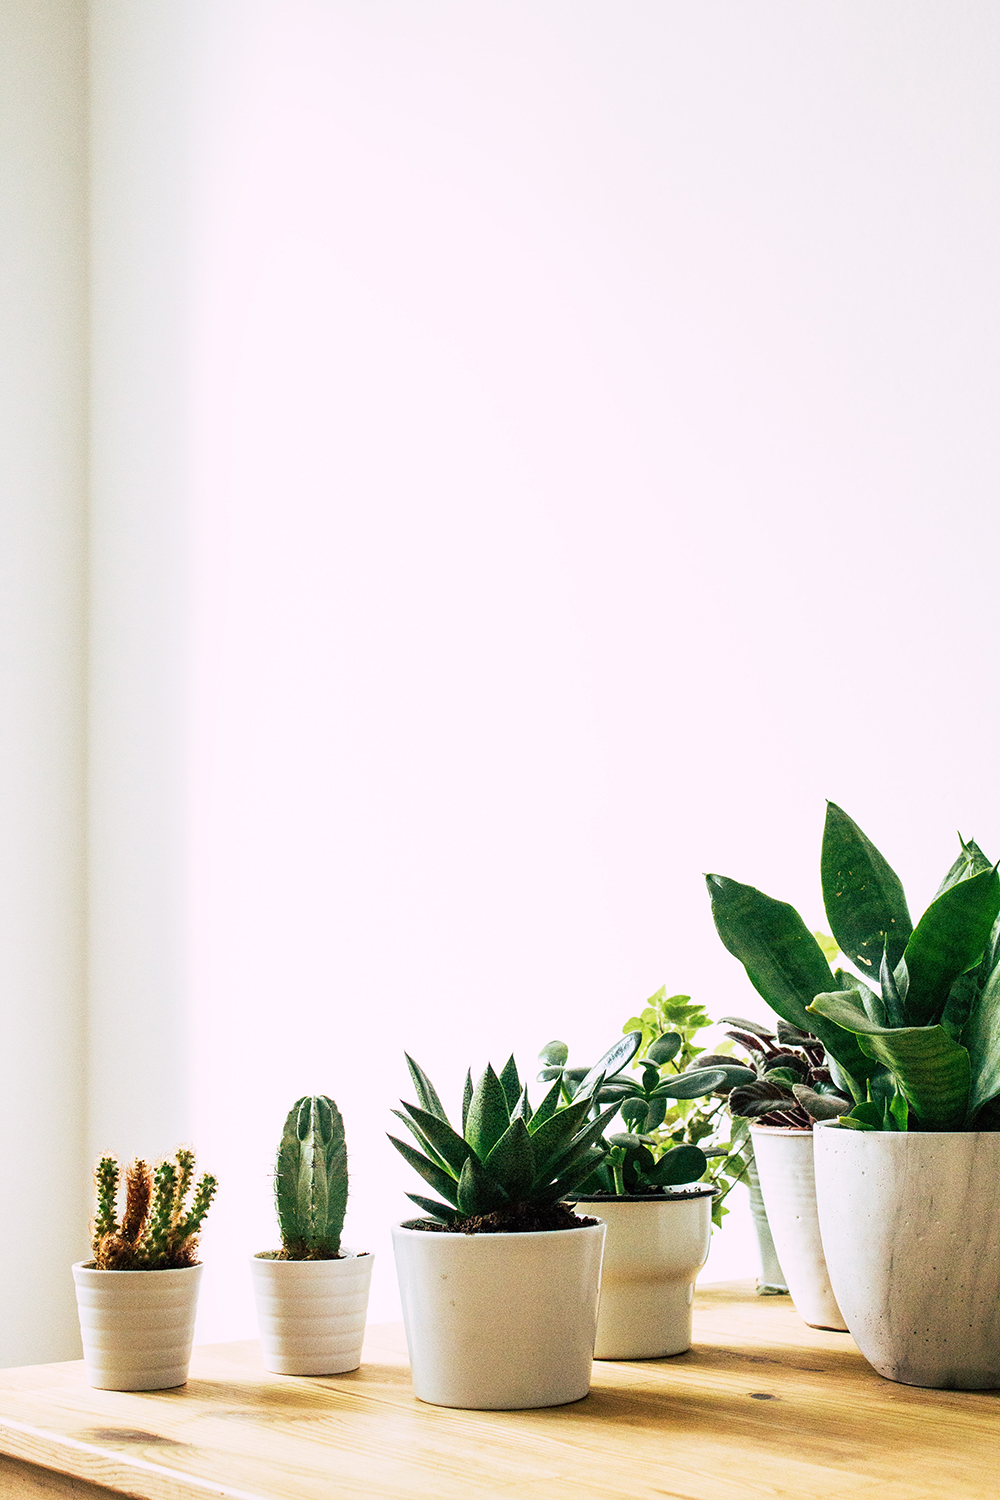 Six succulents and cacti in white pots on a light wooden table in front of a white wall.